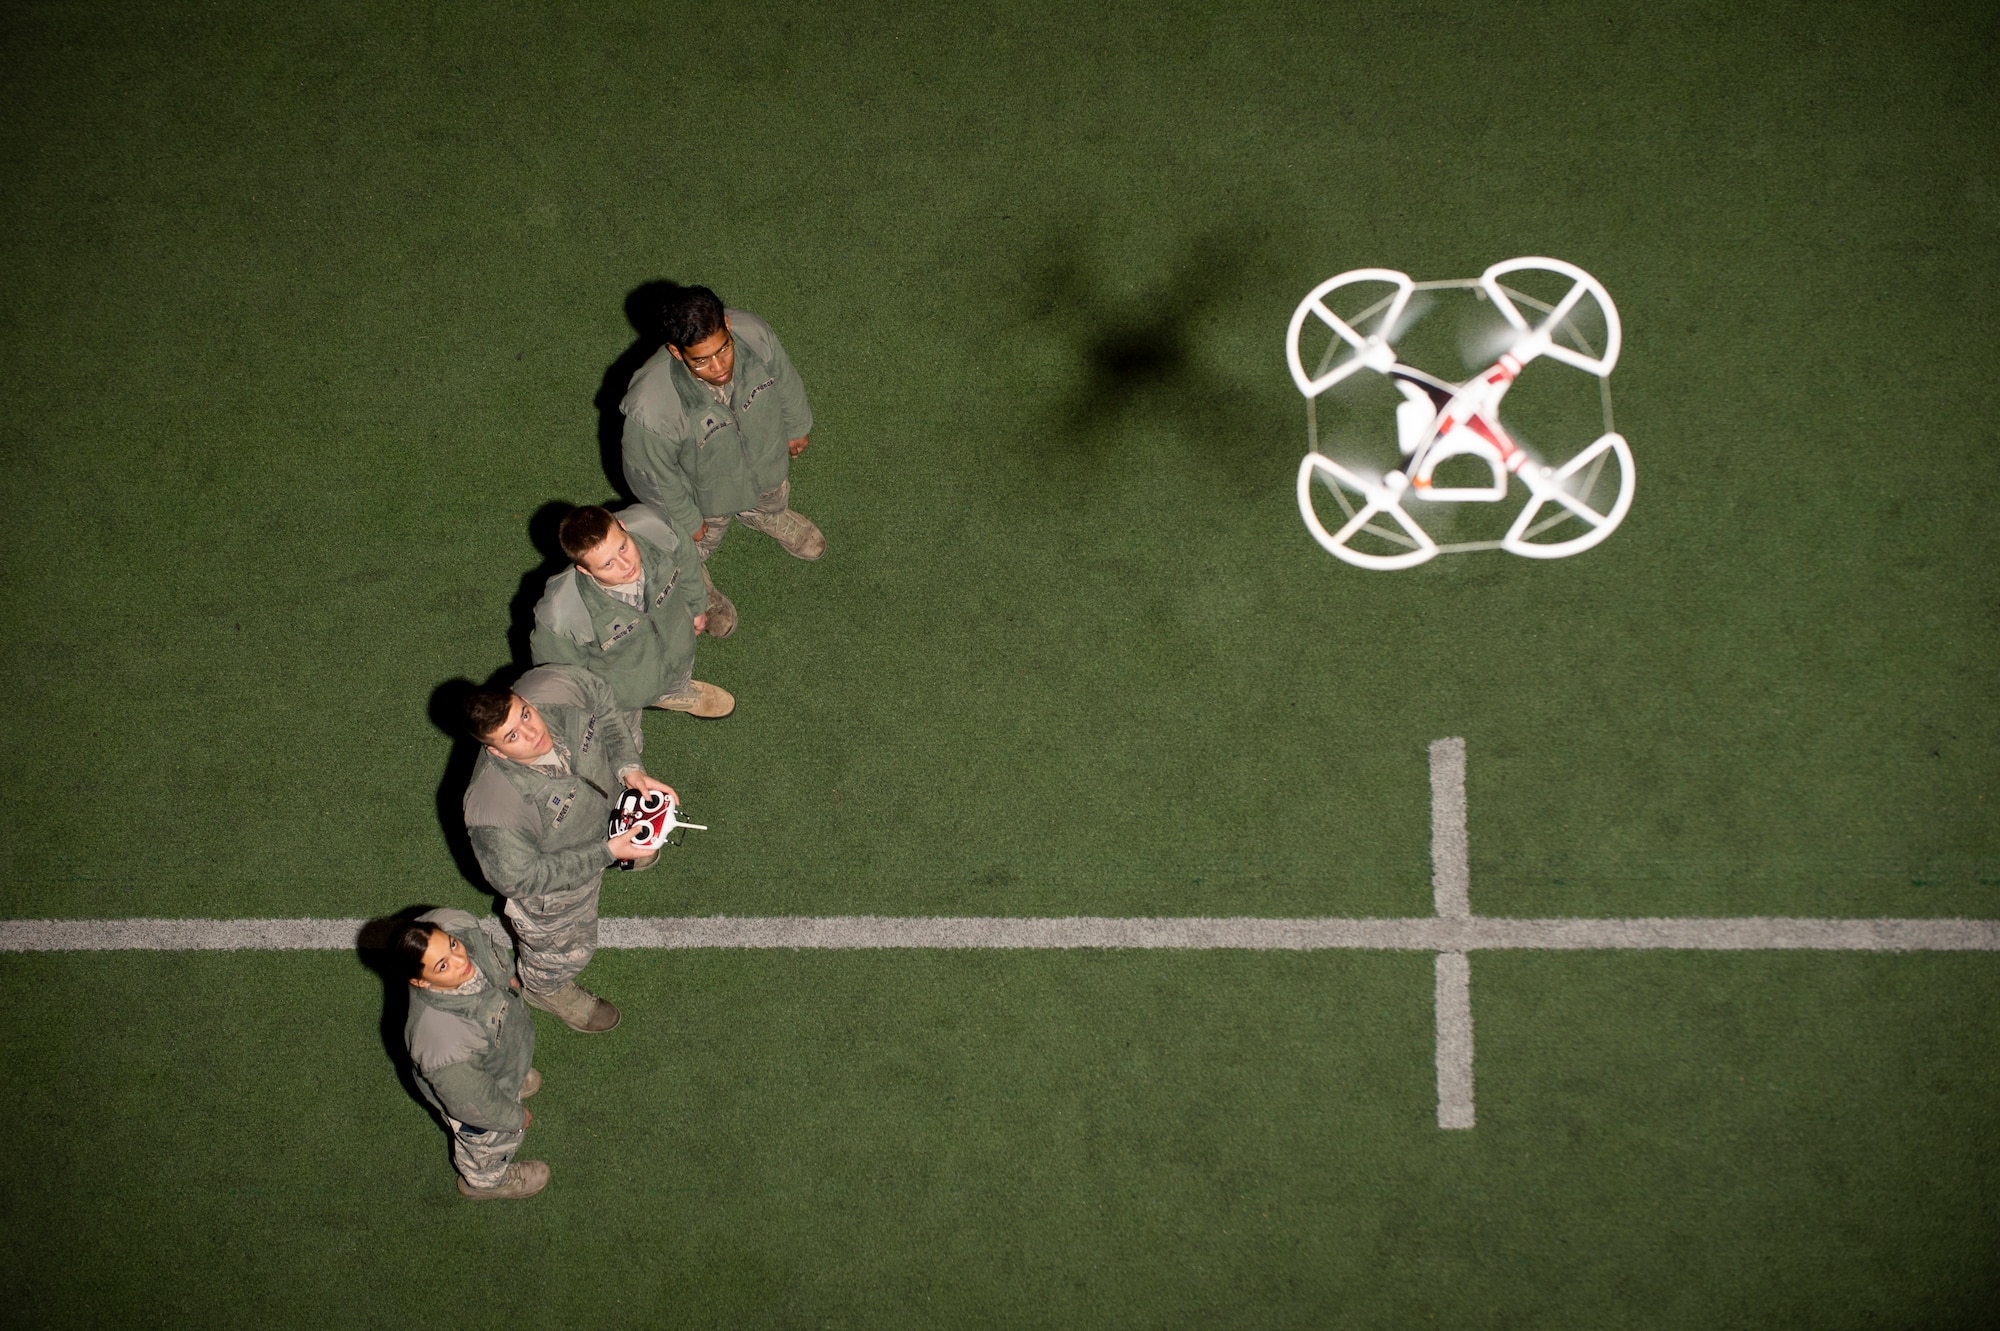 United States Air Force Academy Cadets in the Unmanned Aerial System (UAS) Operations Program familiarize themselves with quadcopter flight controls at The Cadet Field House, Monday March 4th, 2019. (U.S. Air Force photo/Joshua Armstrong)